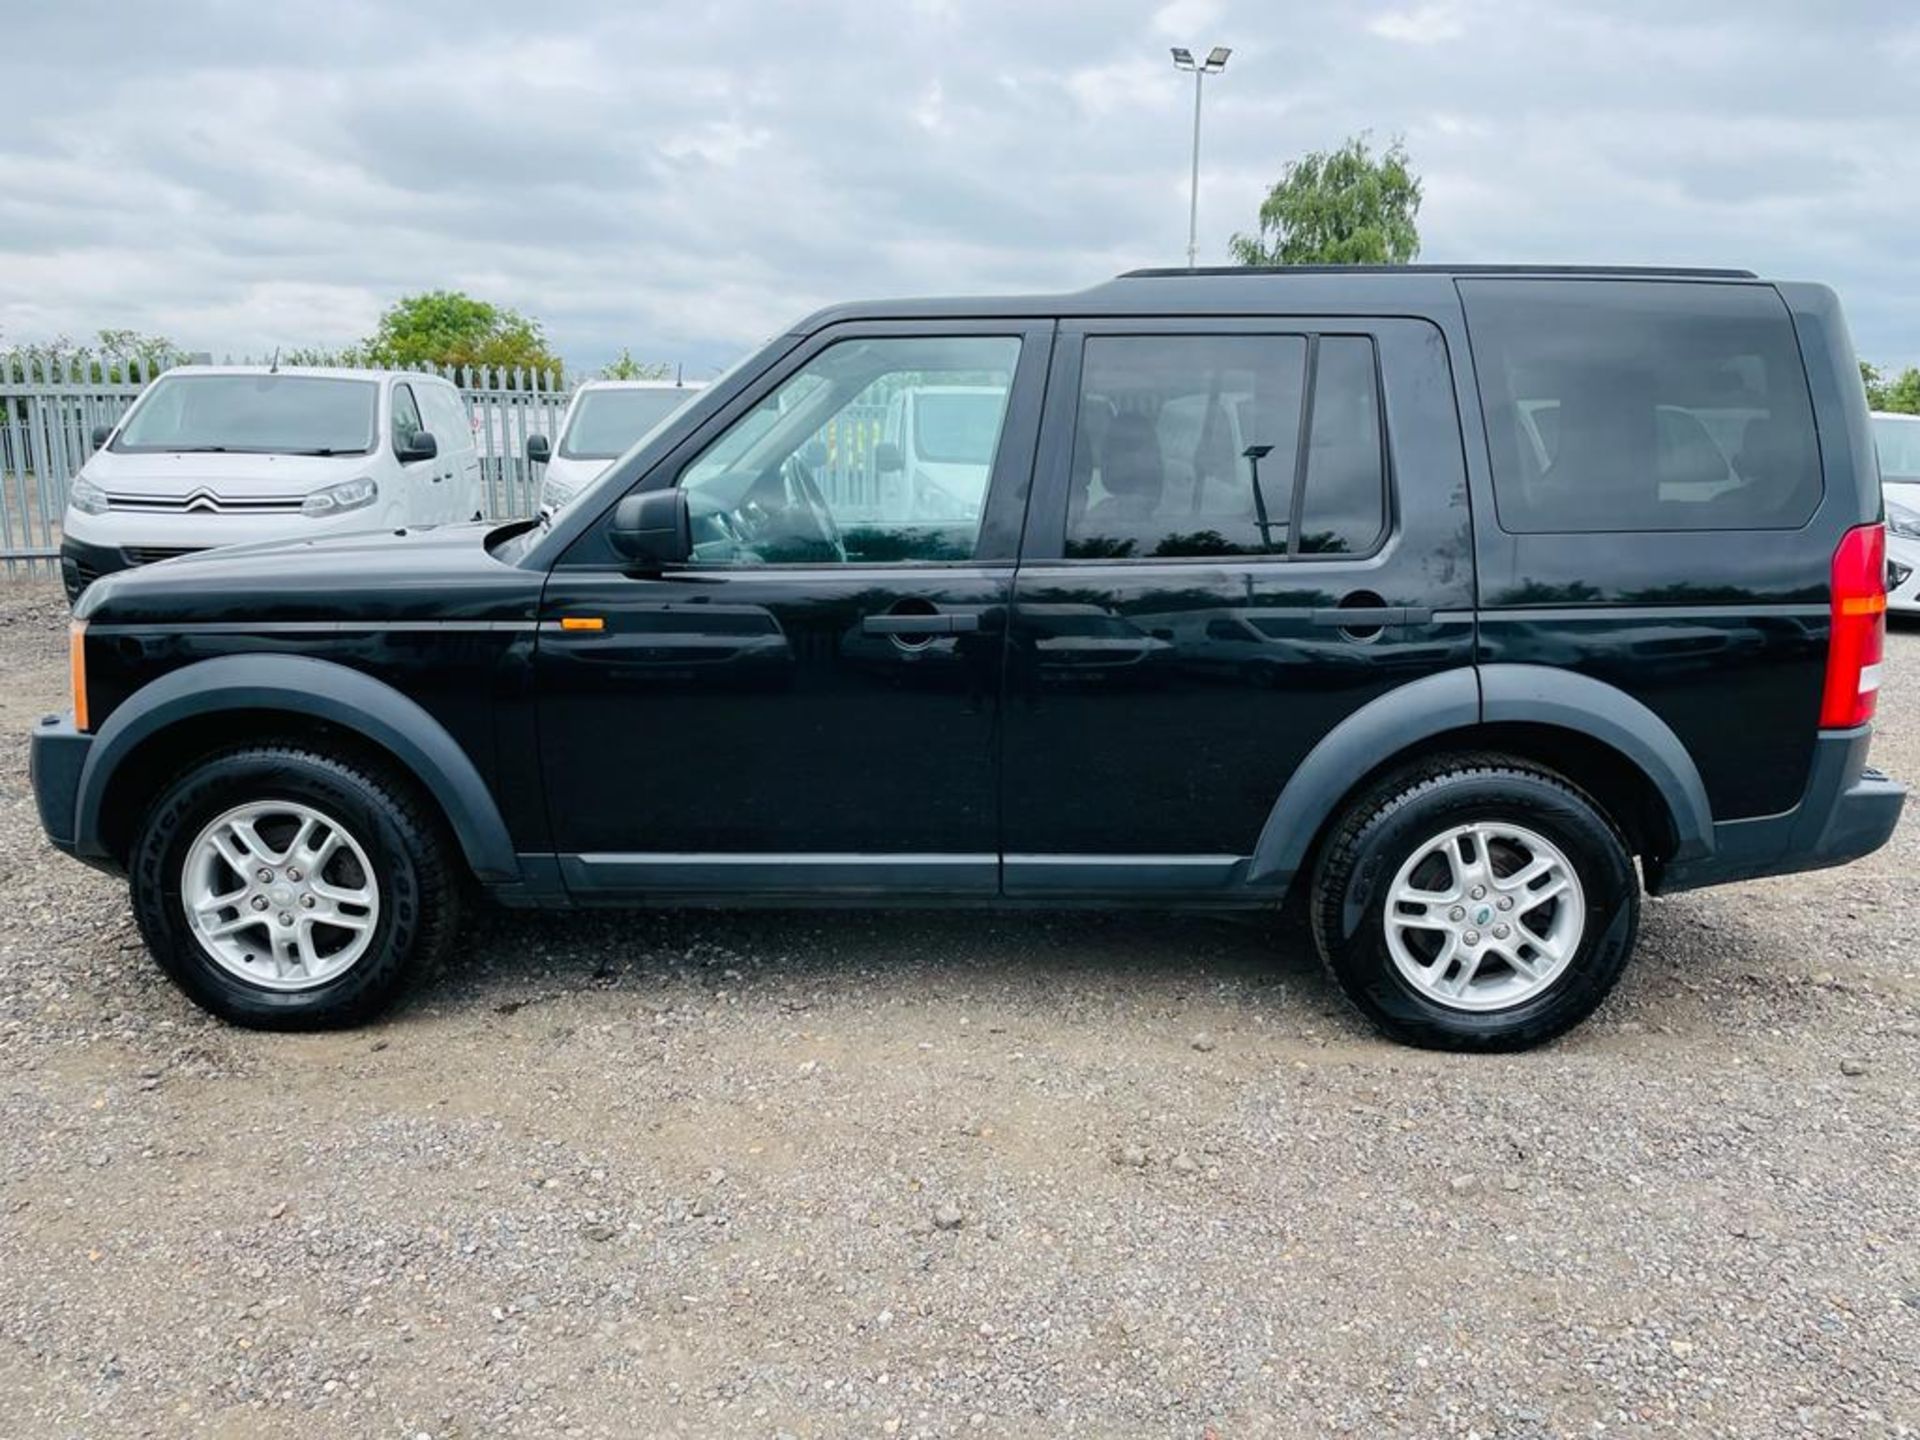 ** ON SALE ** Land Rover Discovery 3 2.7 TDV6 XS Commercial 2008 '57 Reg' A/C - All Terrain Settings - Image 4 of 29